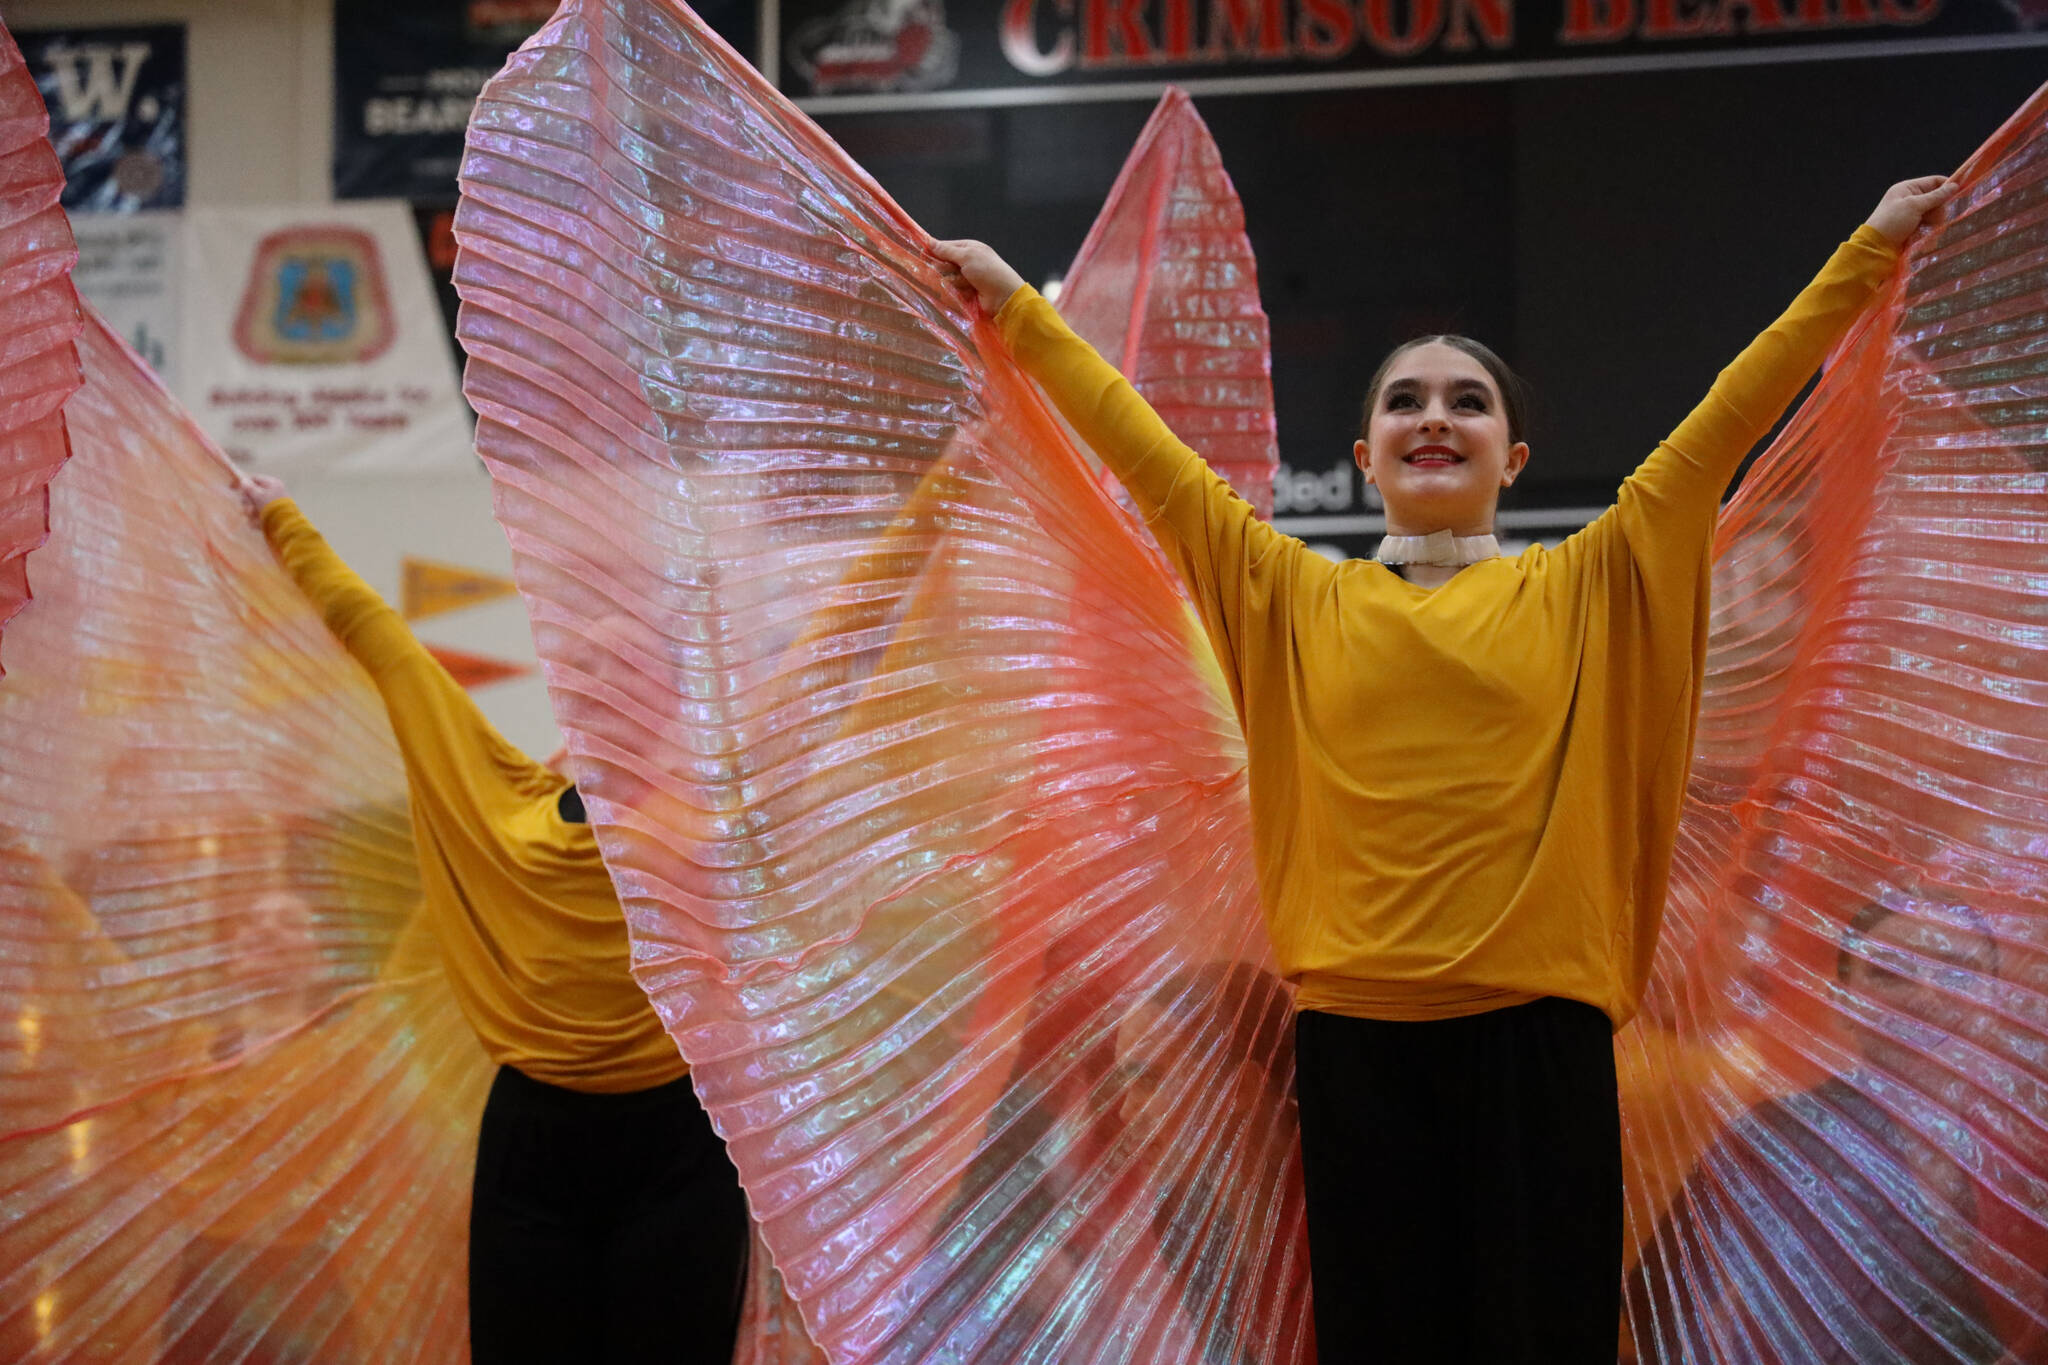 JDHS dance team member’s manage elaborate wardrobe changes with ease during their Hollywood themed performance during the annual Region V 2A/4A dance adjudication competition hosted at Juneau-Douglas High School:Yadaa.at Kalé Saturday afternoon. (Clarise Larson / Juneau Empire)